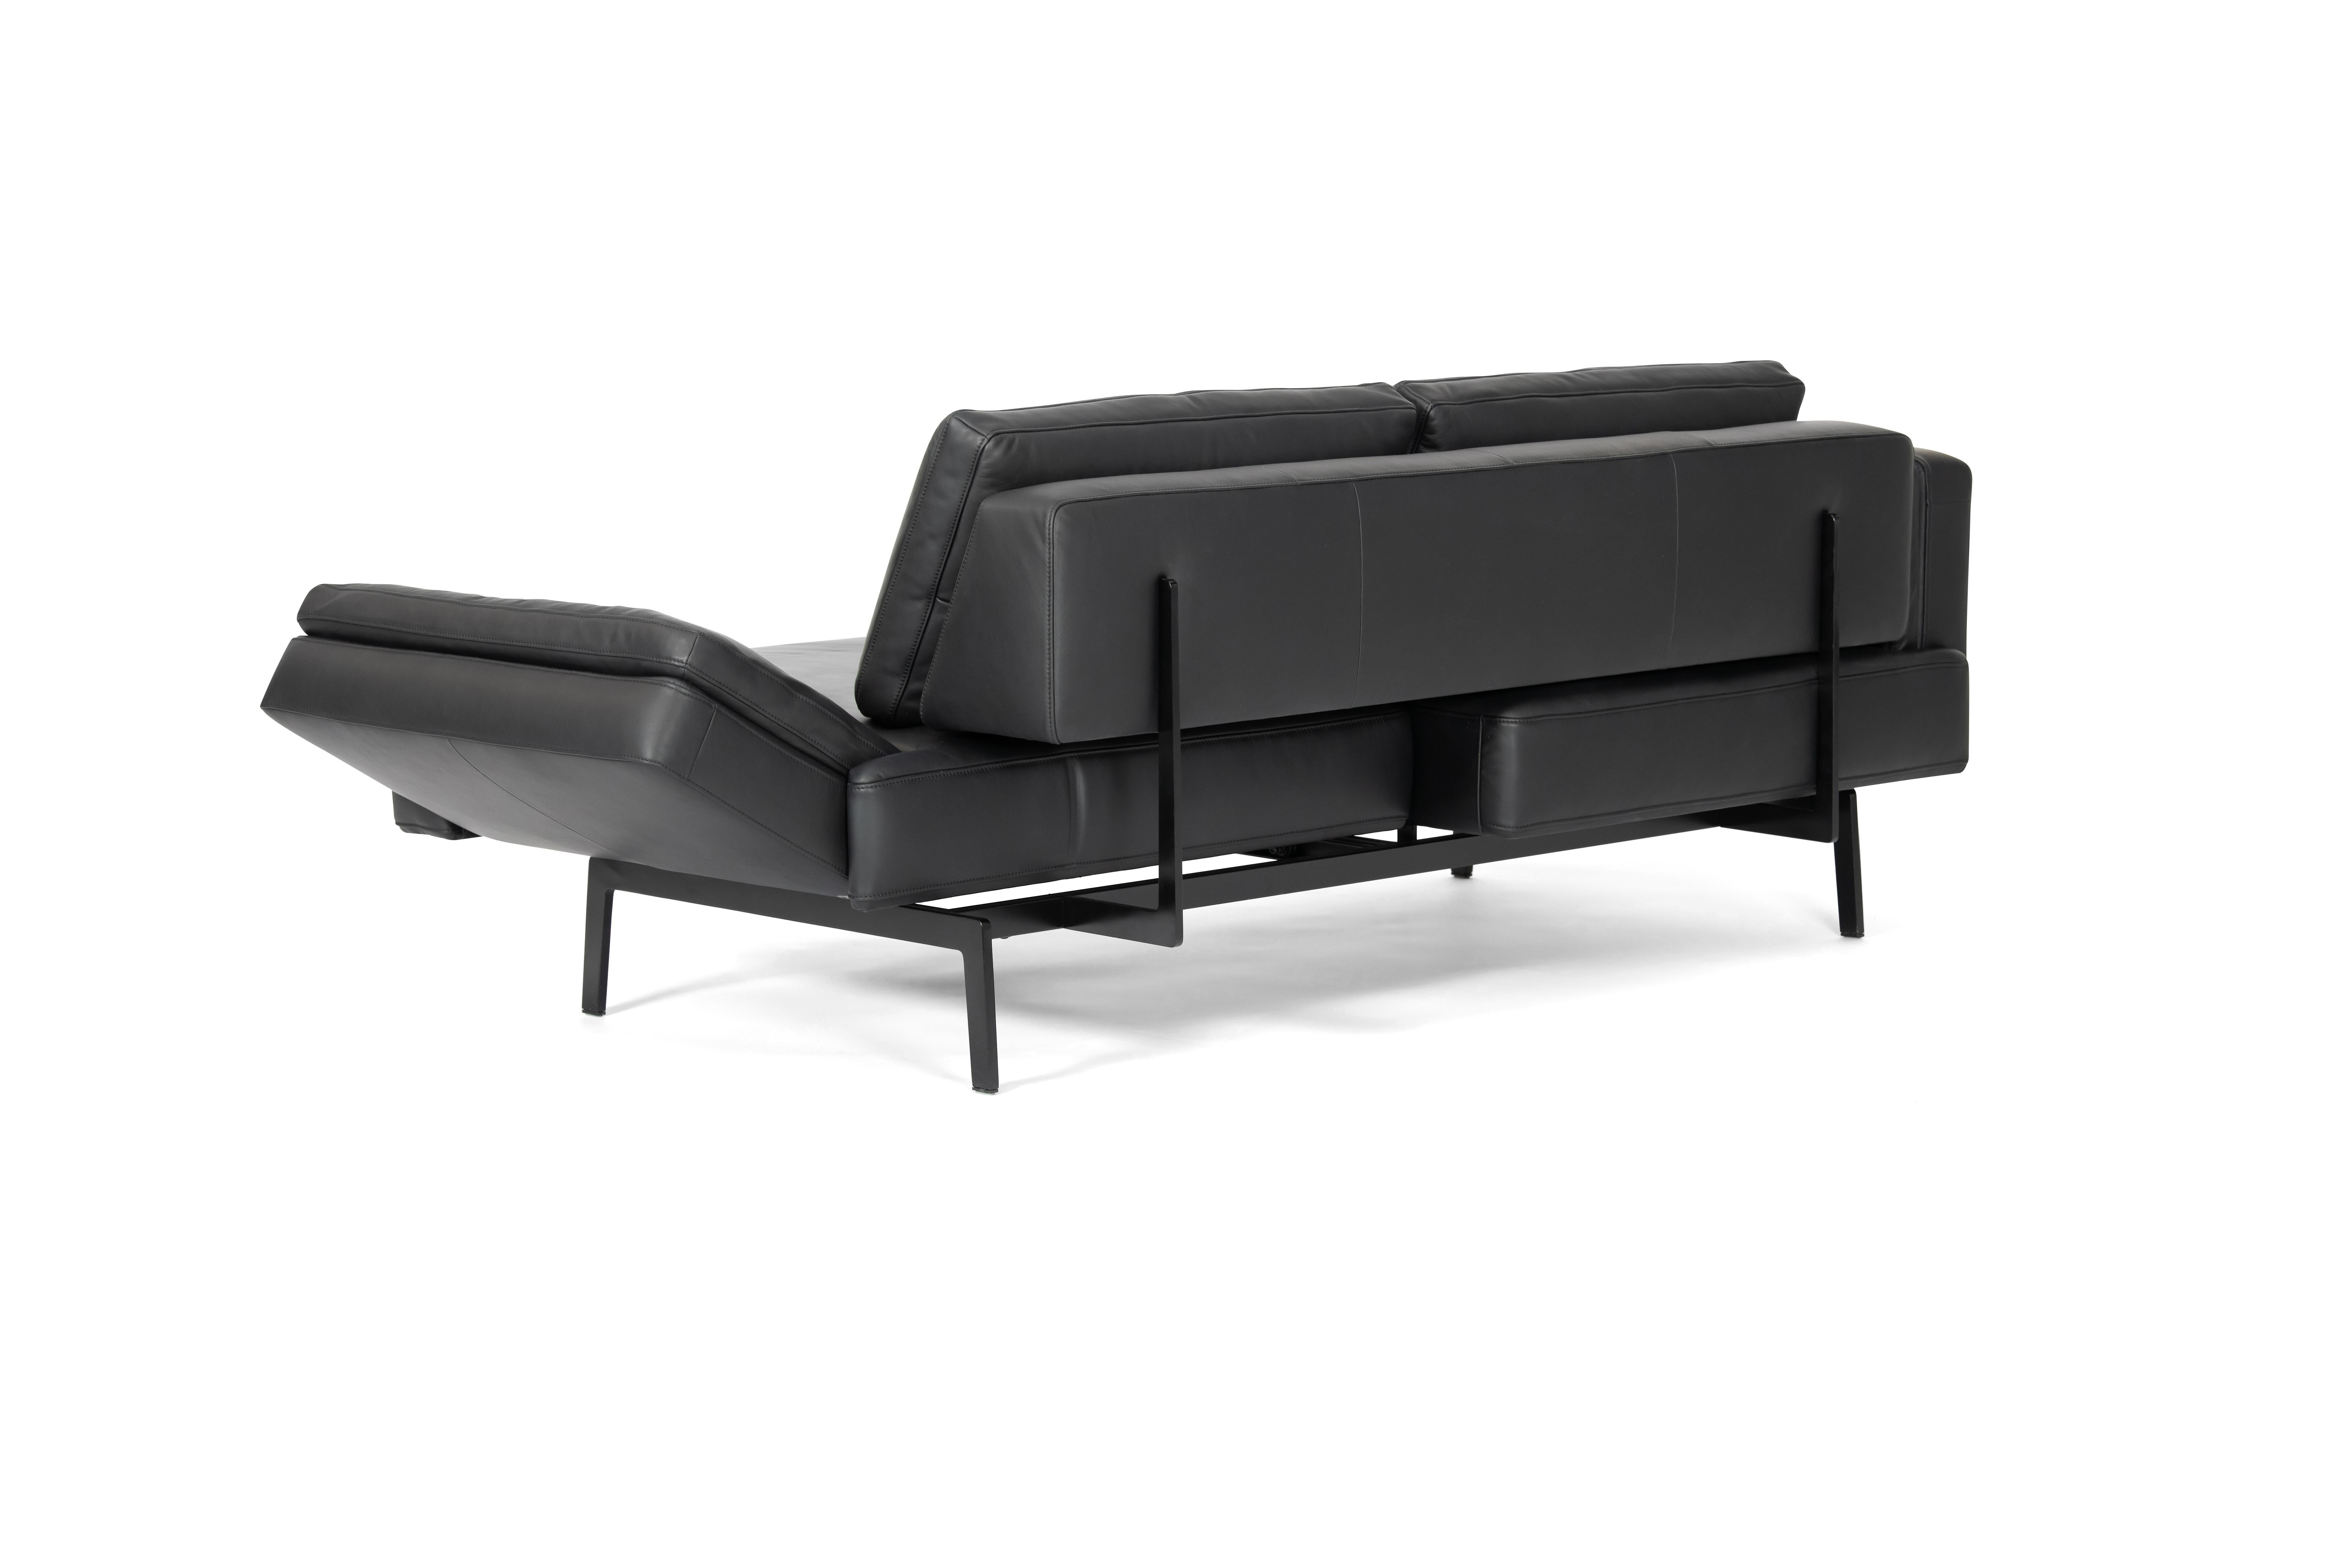 Contemporary De Sede DS-747/03 Multifunctional Sofa in Black Leather Seat and Back Upholstery For Sale